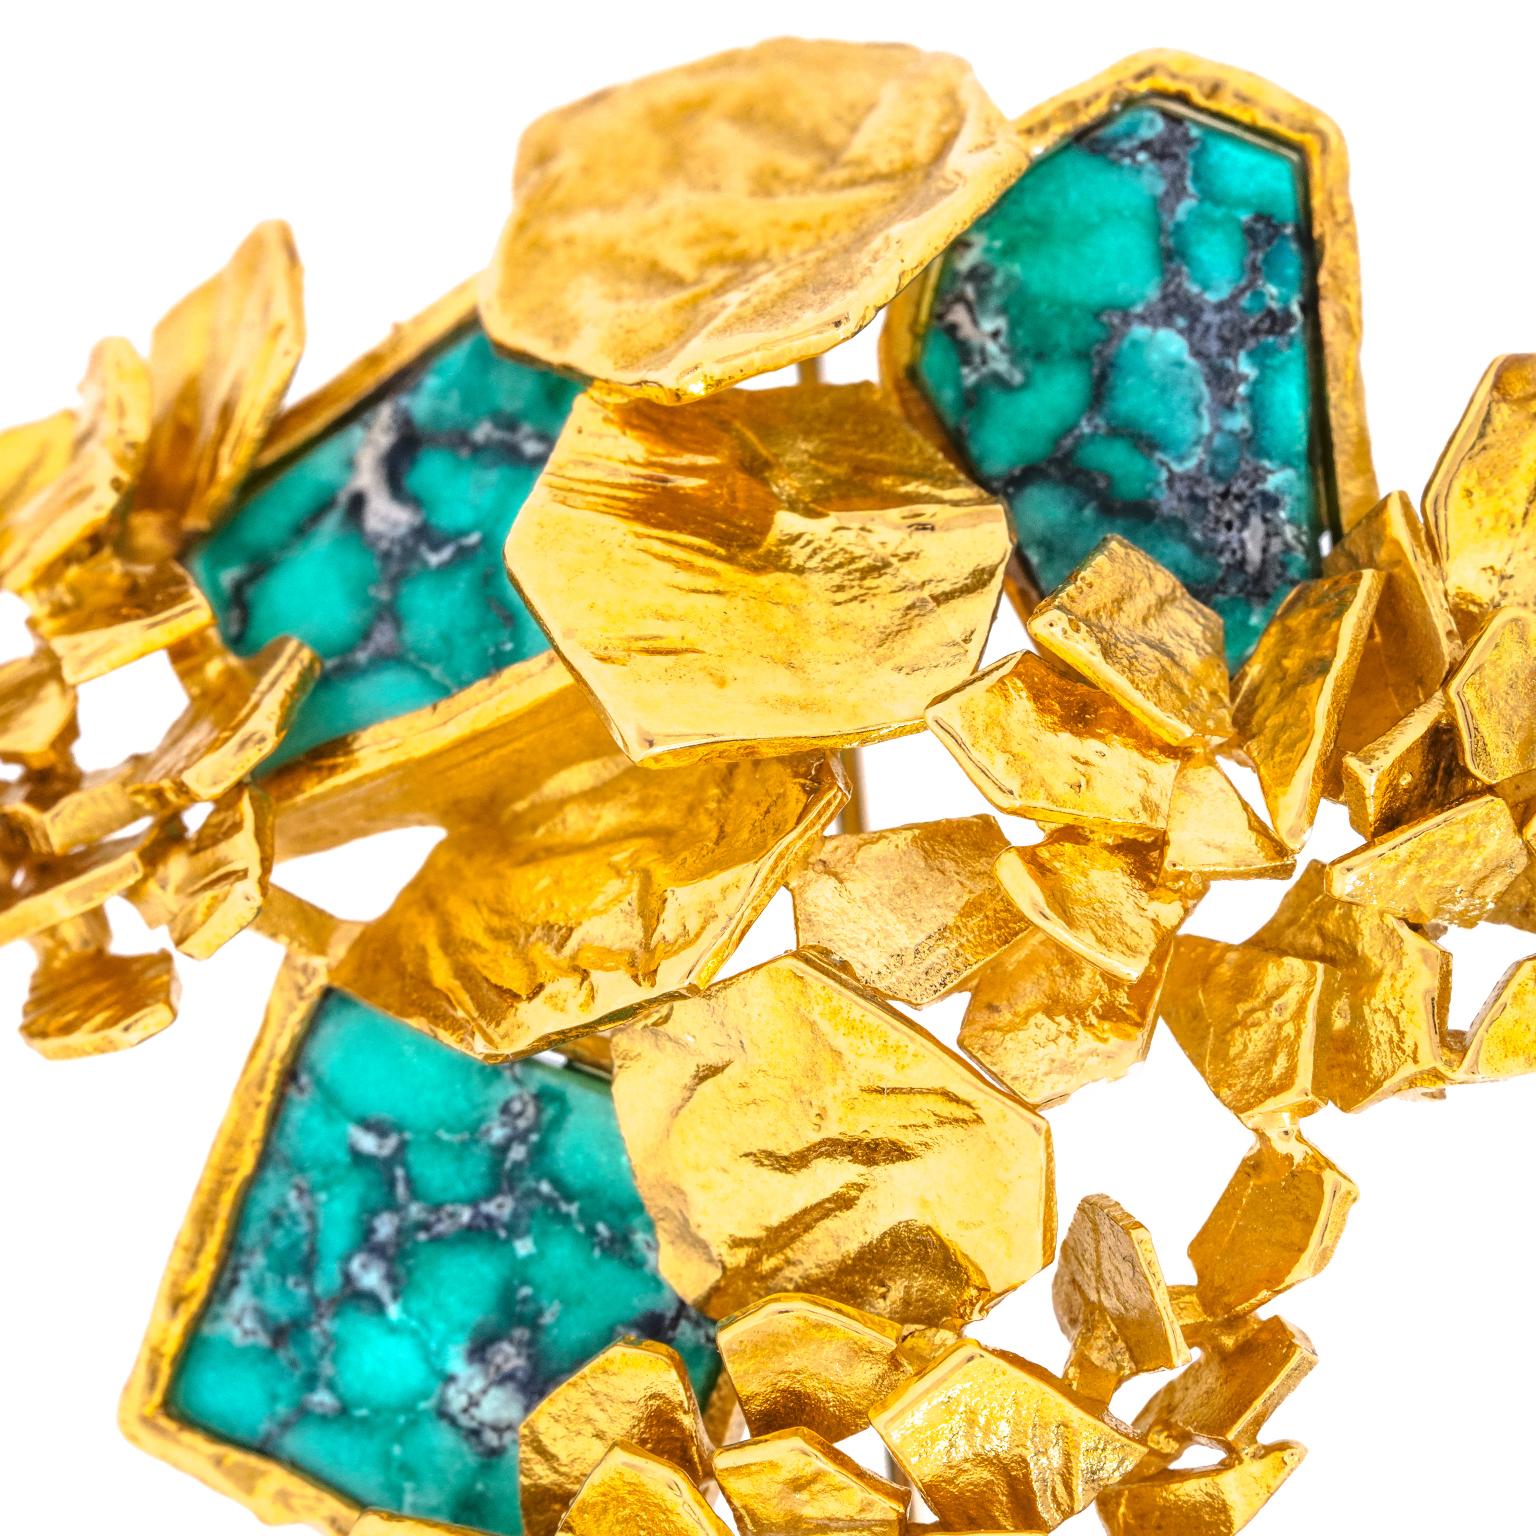 Swiss Modern Sixties Turquoise and Gold Brooch In Excellent Condition For Sale In Litchfield, CT